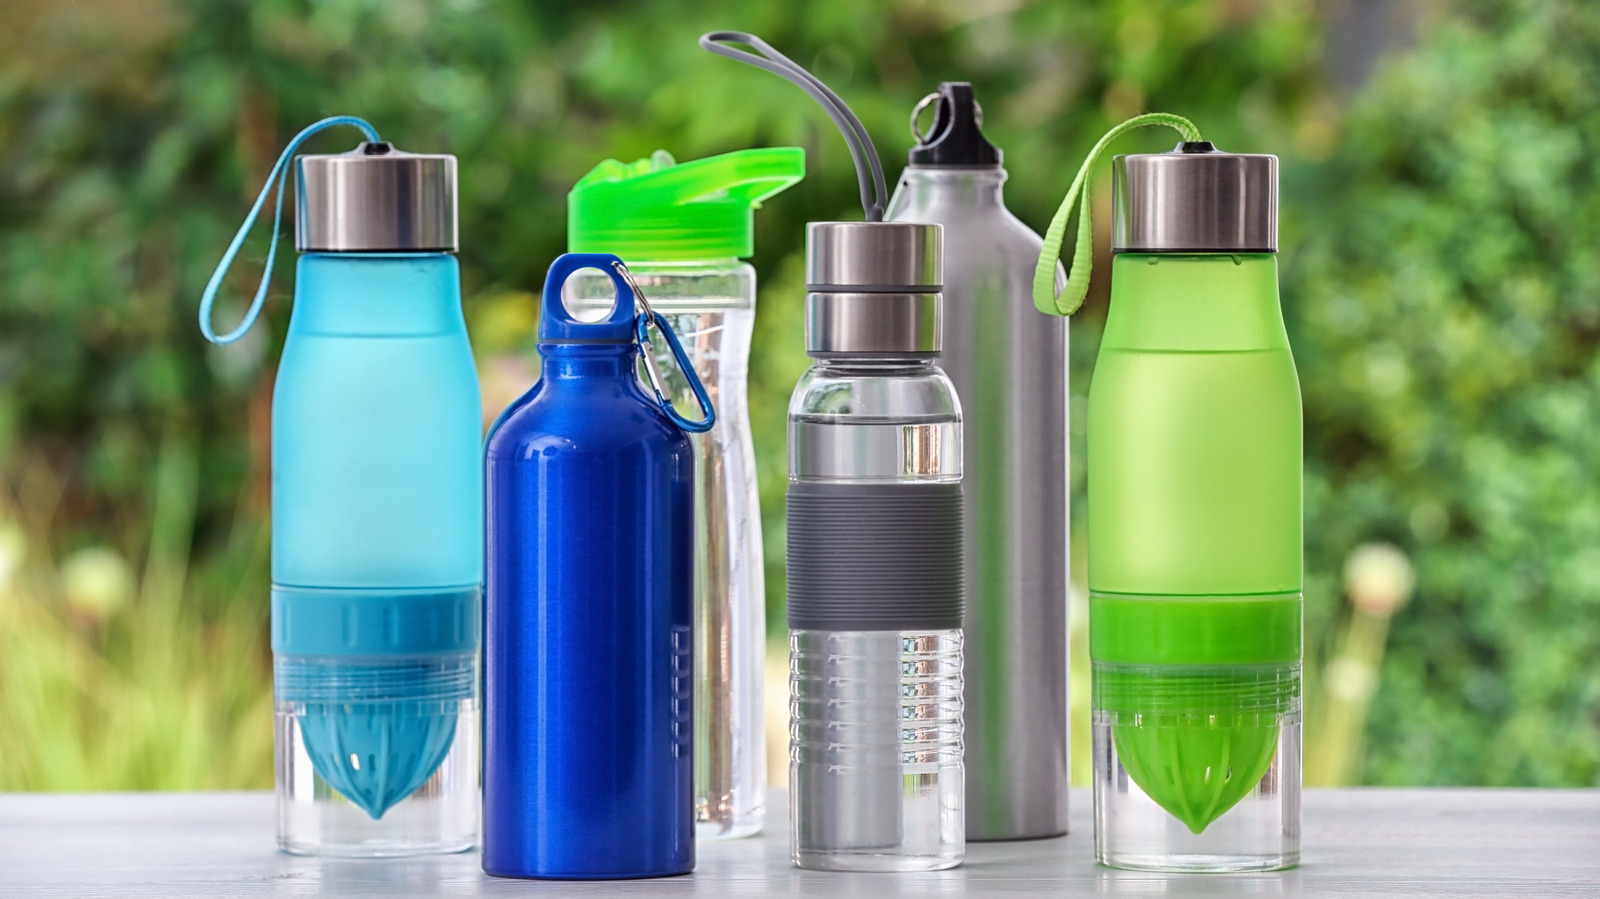 https://www.housedigest.com/img/gallery/heres-how-often-you-need-to-clean-your-reusable-water-bottles/l-intro-1646071564.jpg